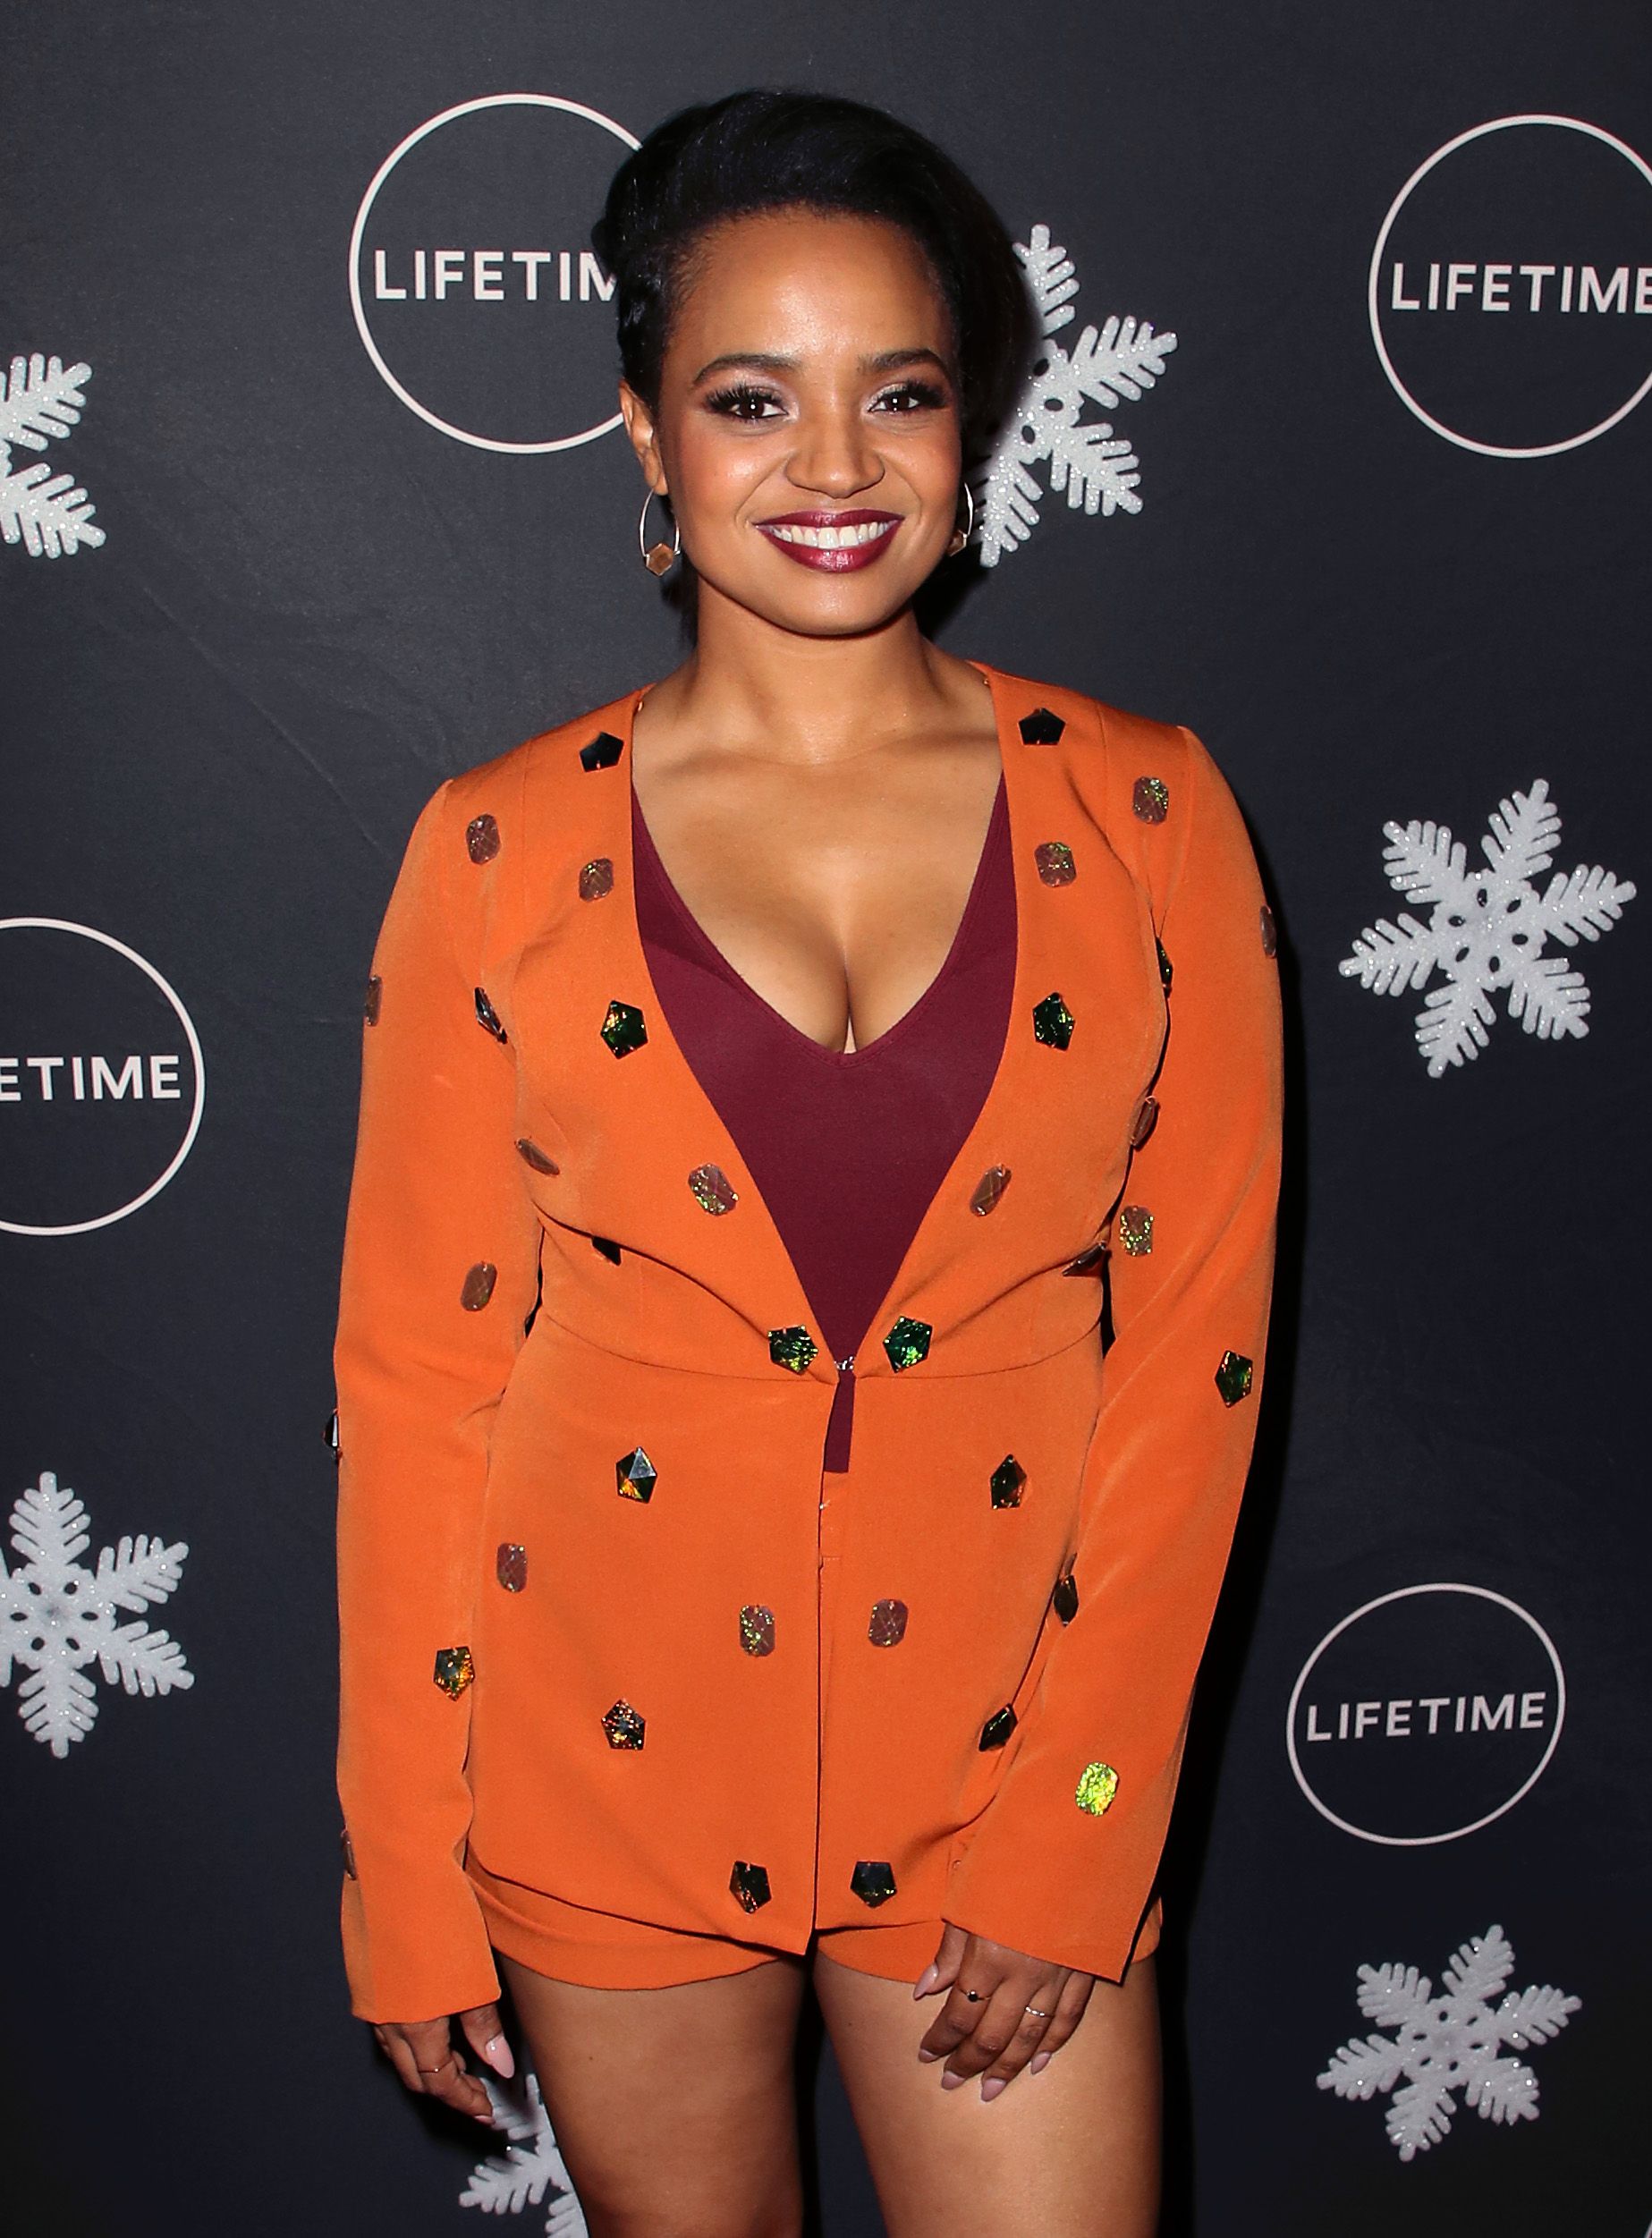 Actress Kyla Pratt attends the 2019 "It's a Wonderful Lifetime" holiday party at Los Angeles, California on October 22, 2019 | Photo: Getty Images